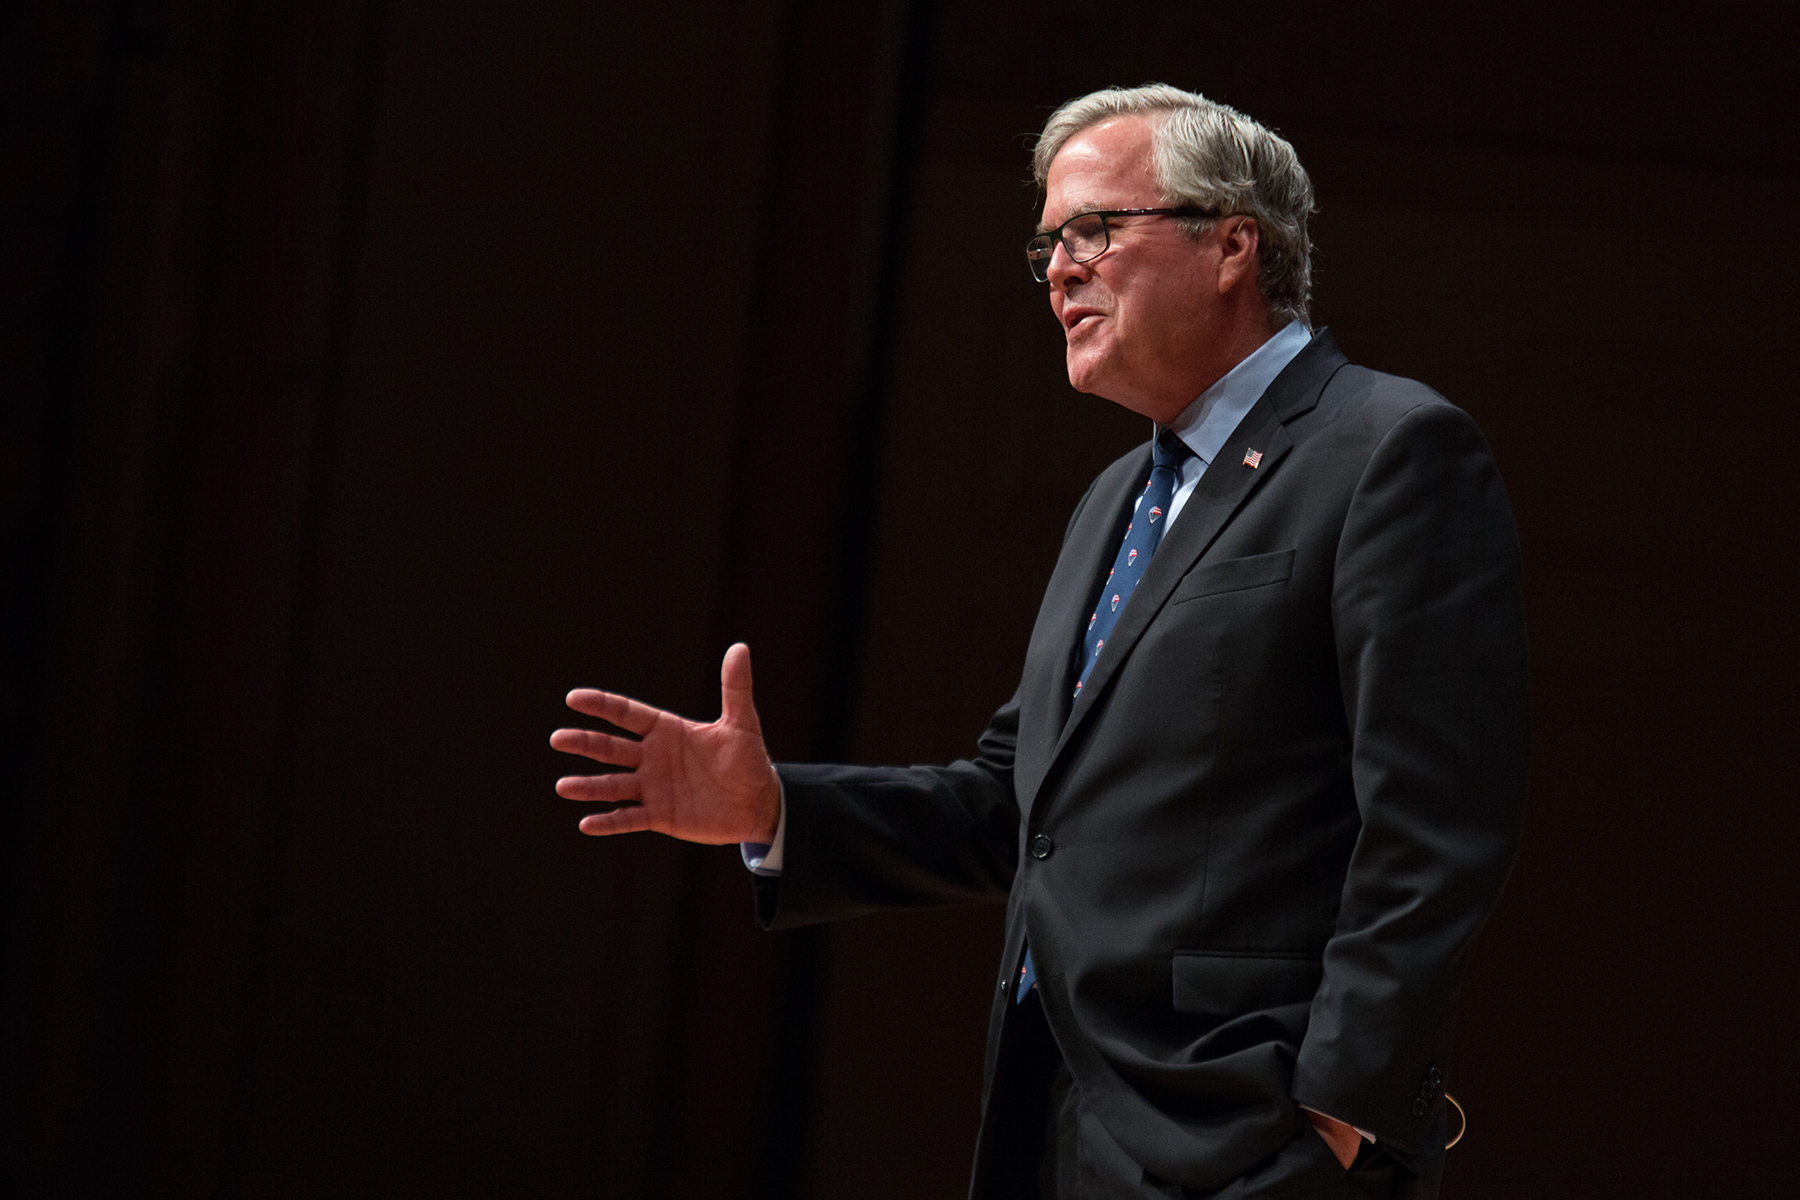 Jeb Bush gestures while he stands and delivers his lecture